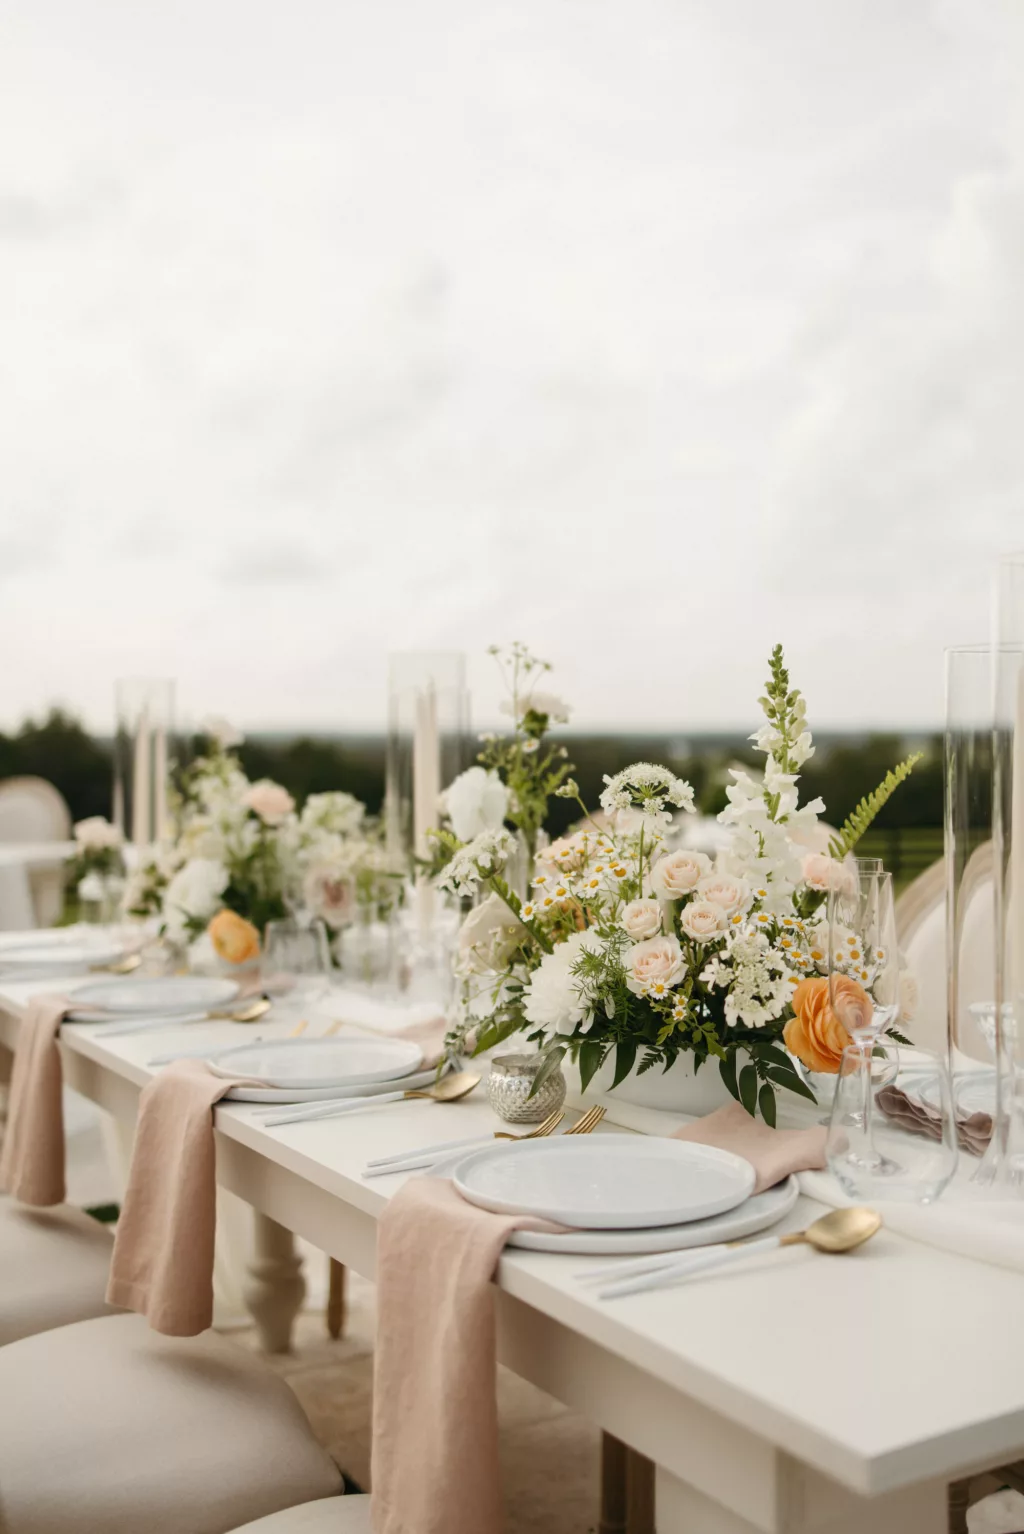 Neutral Spring European Inspired Wedding Reception Tablescape Ideas | Gold and White Flatware Inspiration | Blush Linen Napkins | Taper Candles, White Roses and Feverfew Daisy Centerpiece Decor | Tampa Bay Event Planner The Olive Tree Weddings